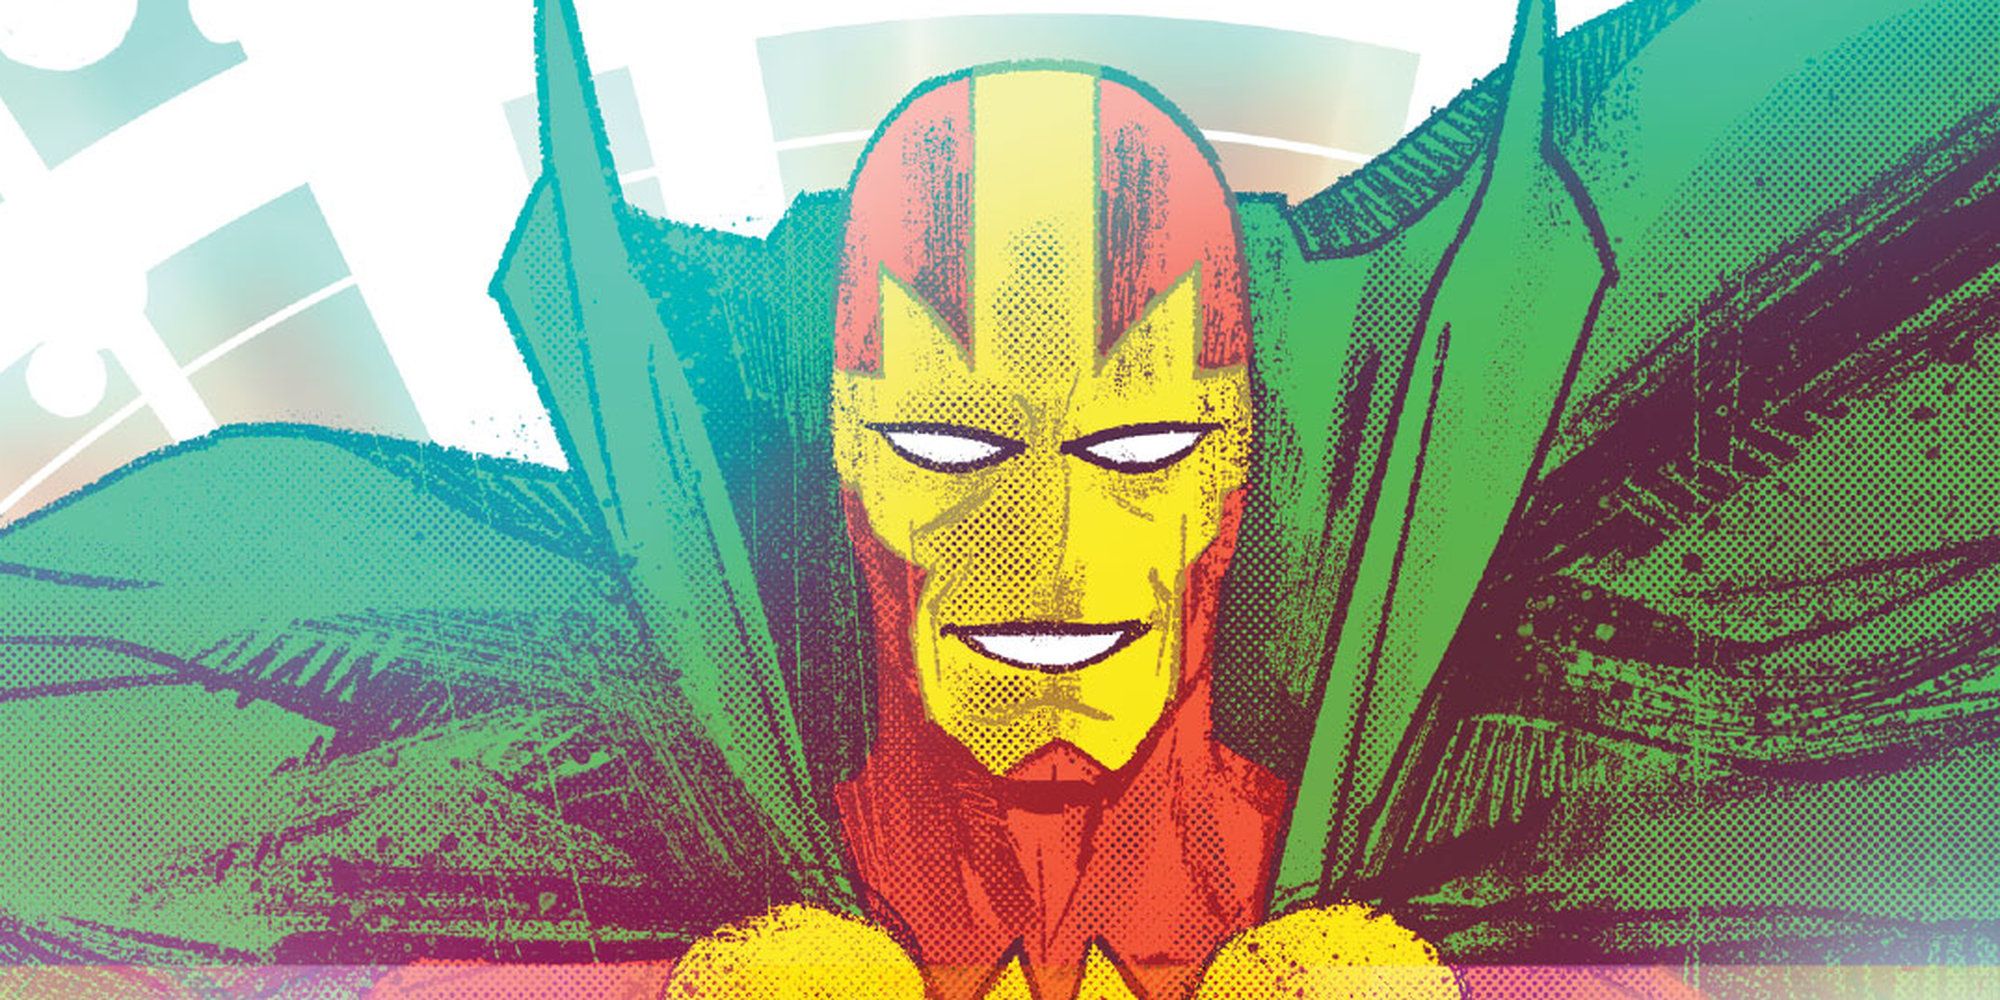 Mister Miracle smiling on the cover of a DC Comic.